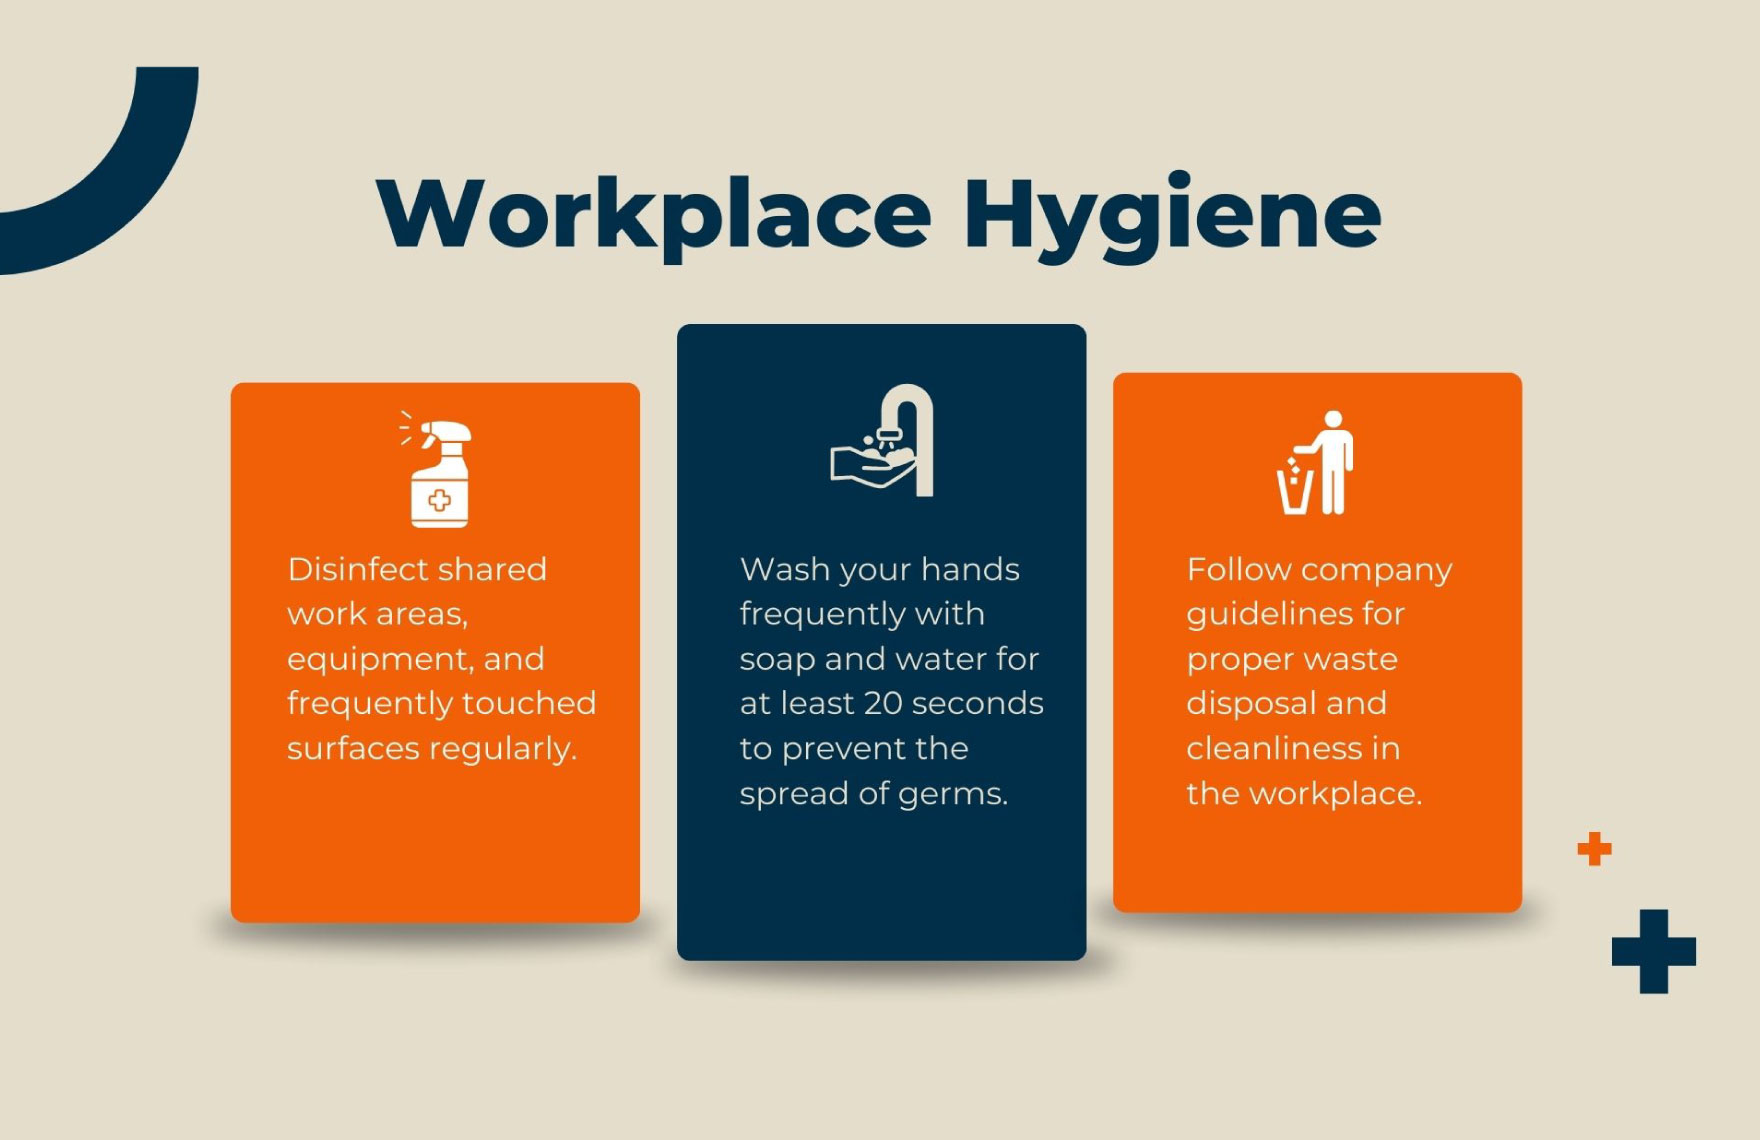 Health and Safety Orientation for New Employees Google Slides Template